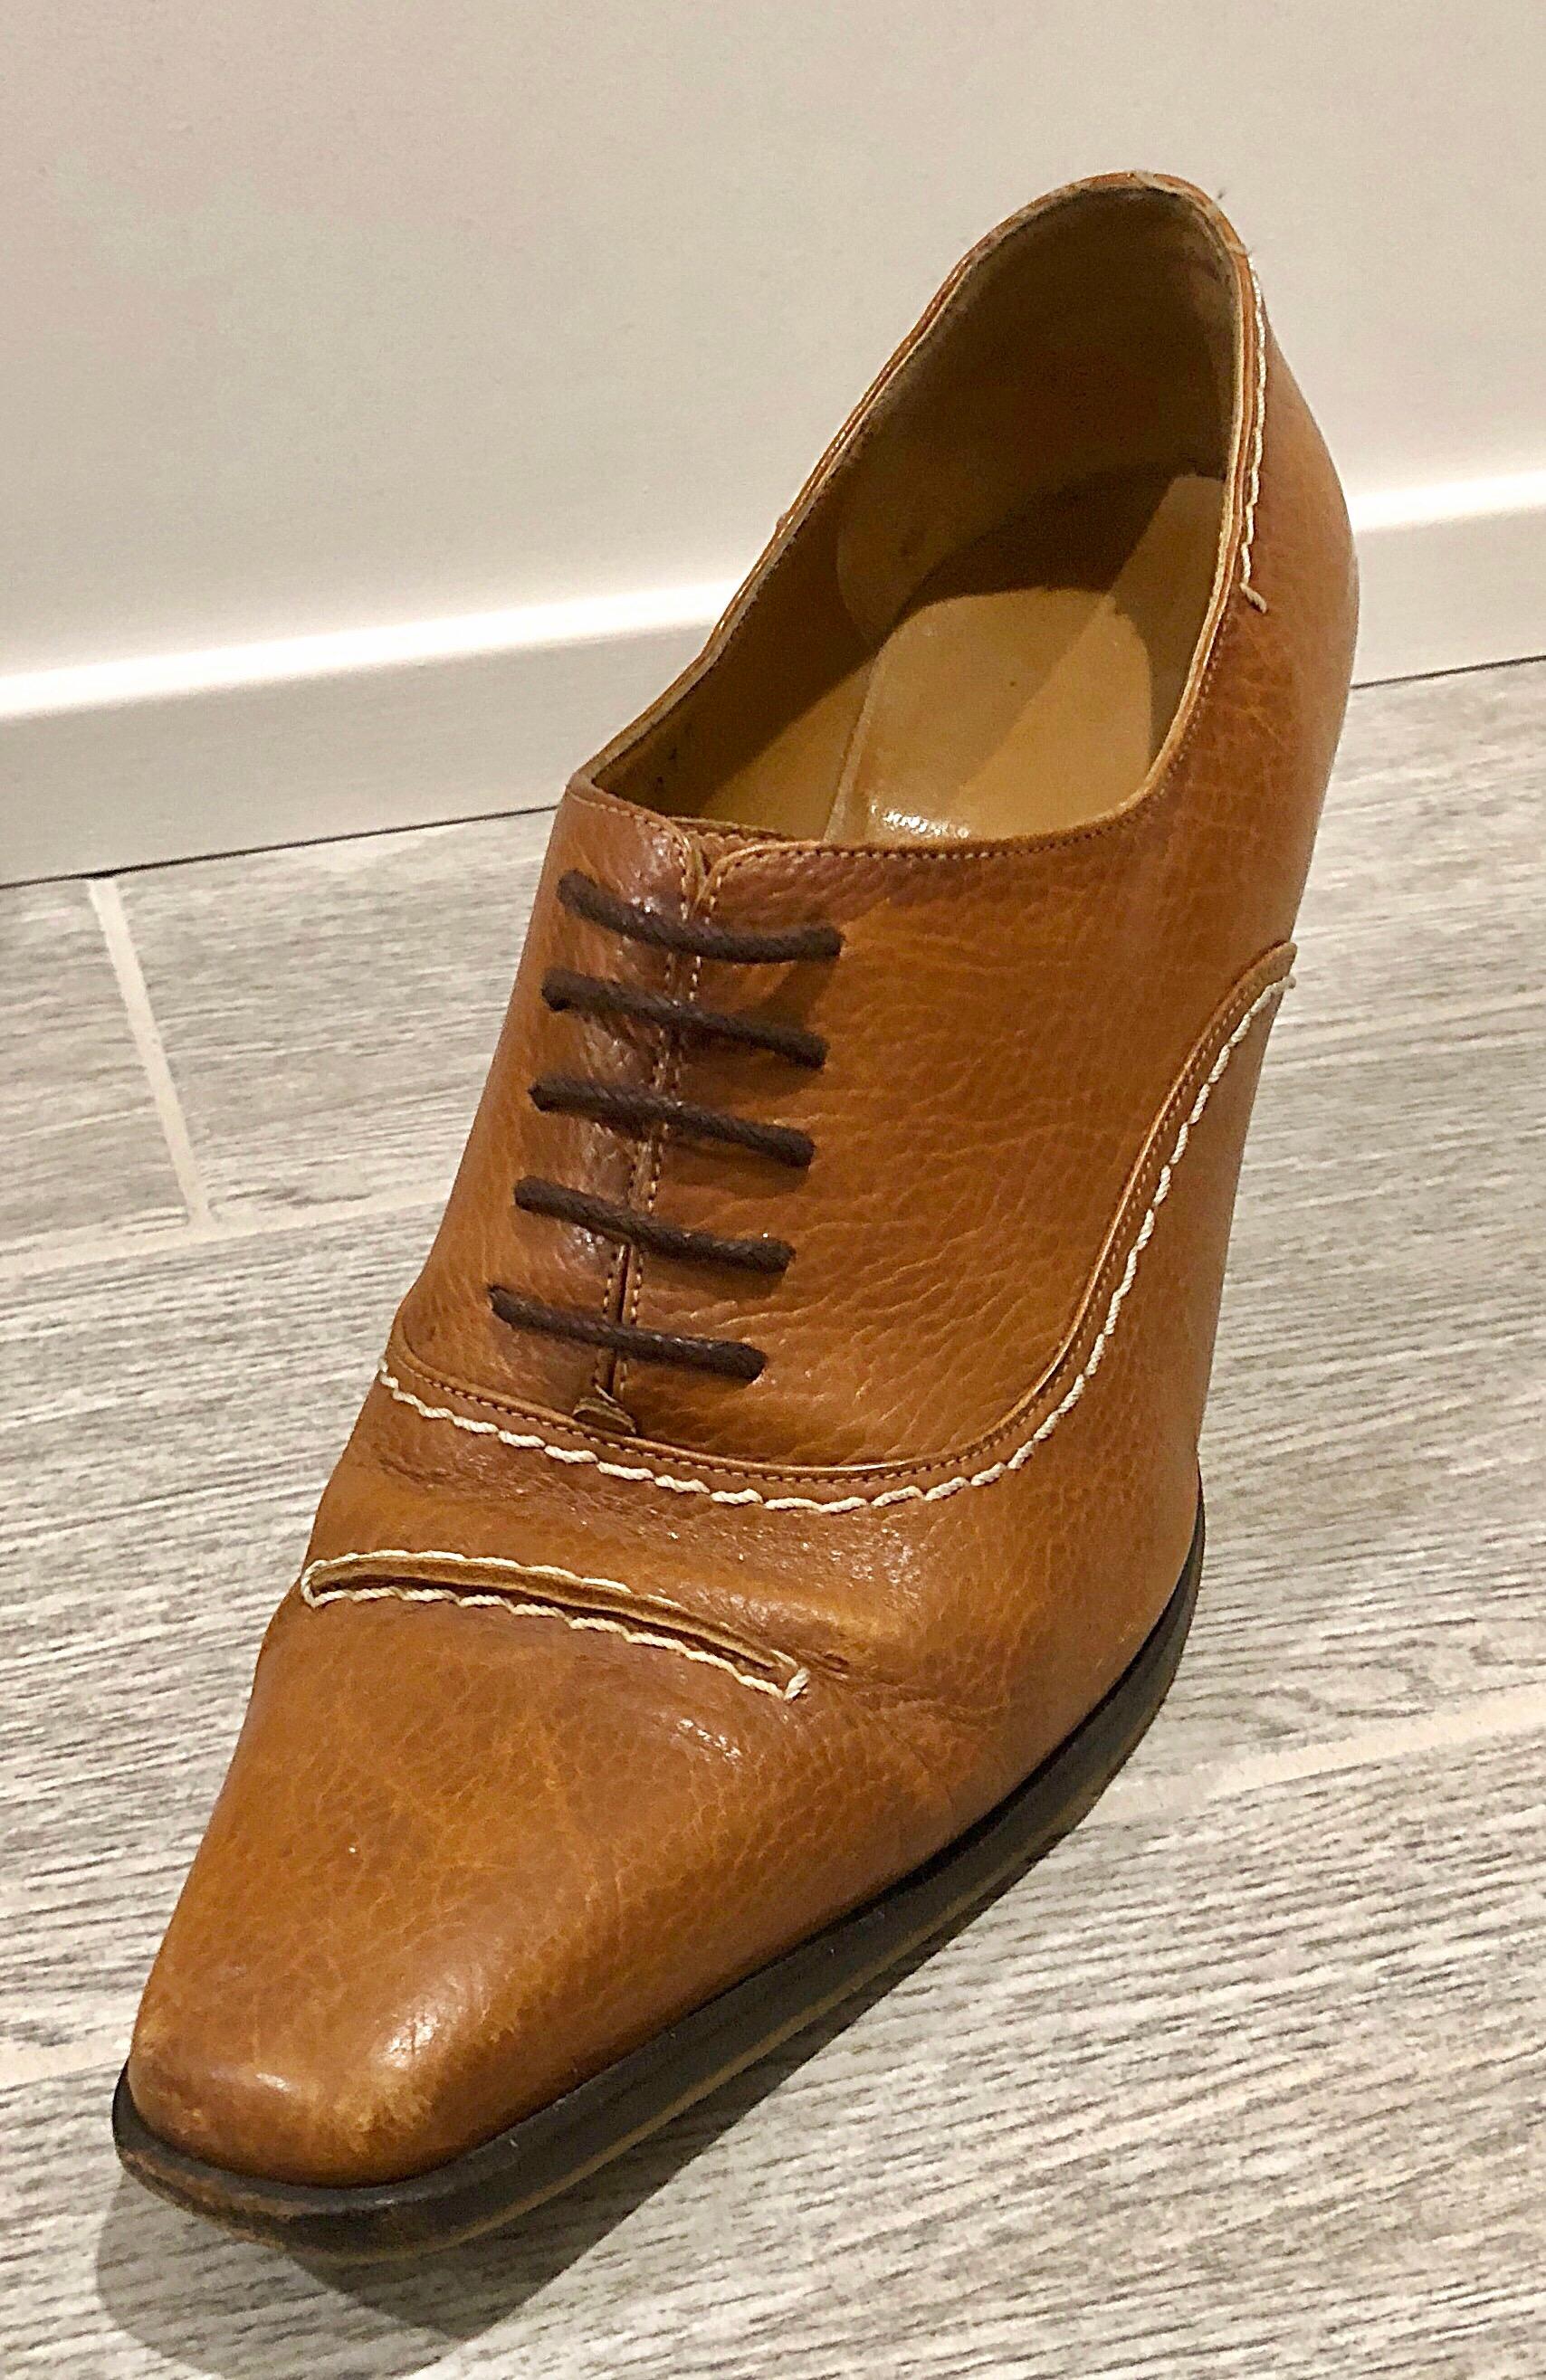 Insanely chic late 1990s SALVATORE FERRAGAMO saddle camel colored leather high heel lace up oxford booties! The perfect color that matches anything, and is great all year. Can easily be dressed up or down. Great with jeans, shorts, a skirt or dress.